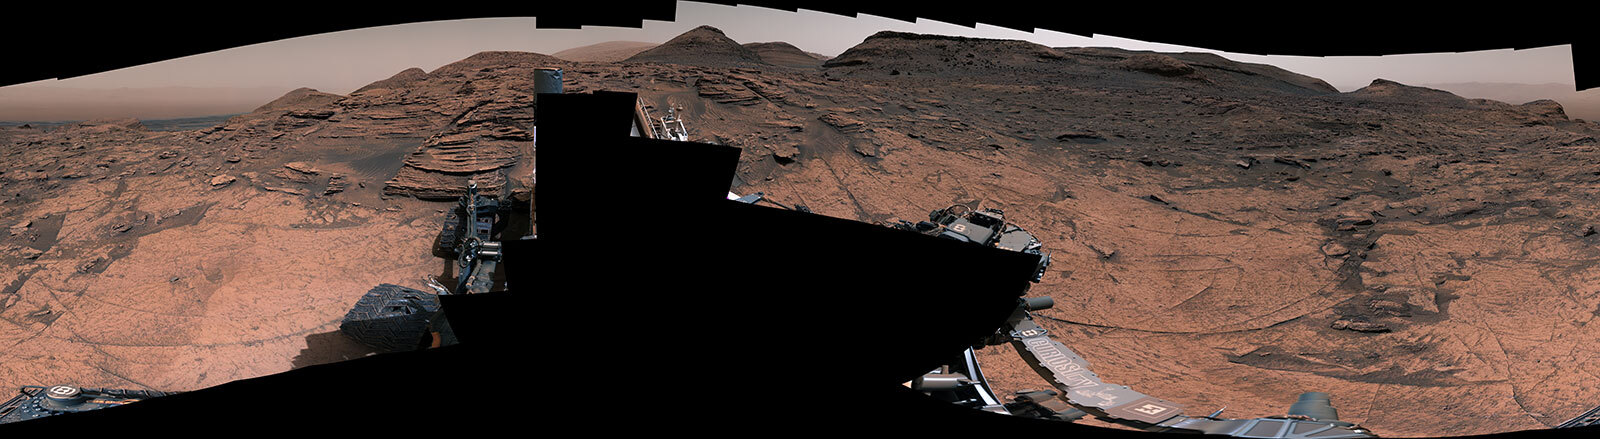 NASA’s Curiosity Mars rover took this 360-degree panorama at a drill site nicknamed “Avanavero” on June 20, 2022, the 3,509th Martian day, or sol, of the mission.